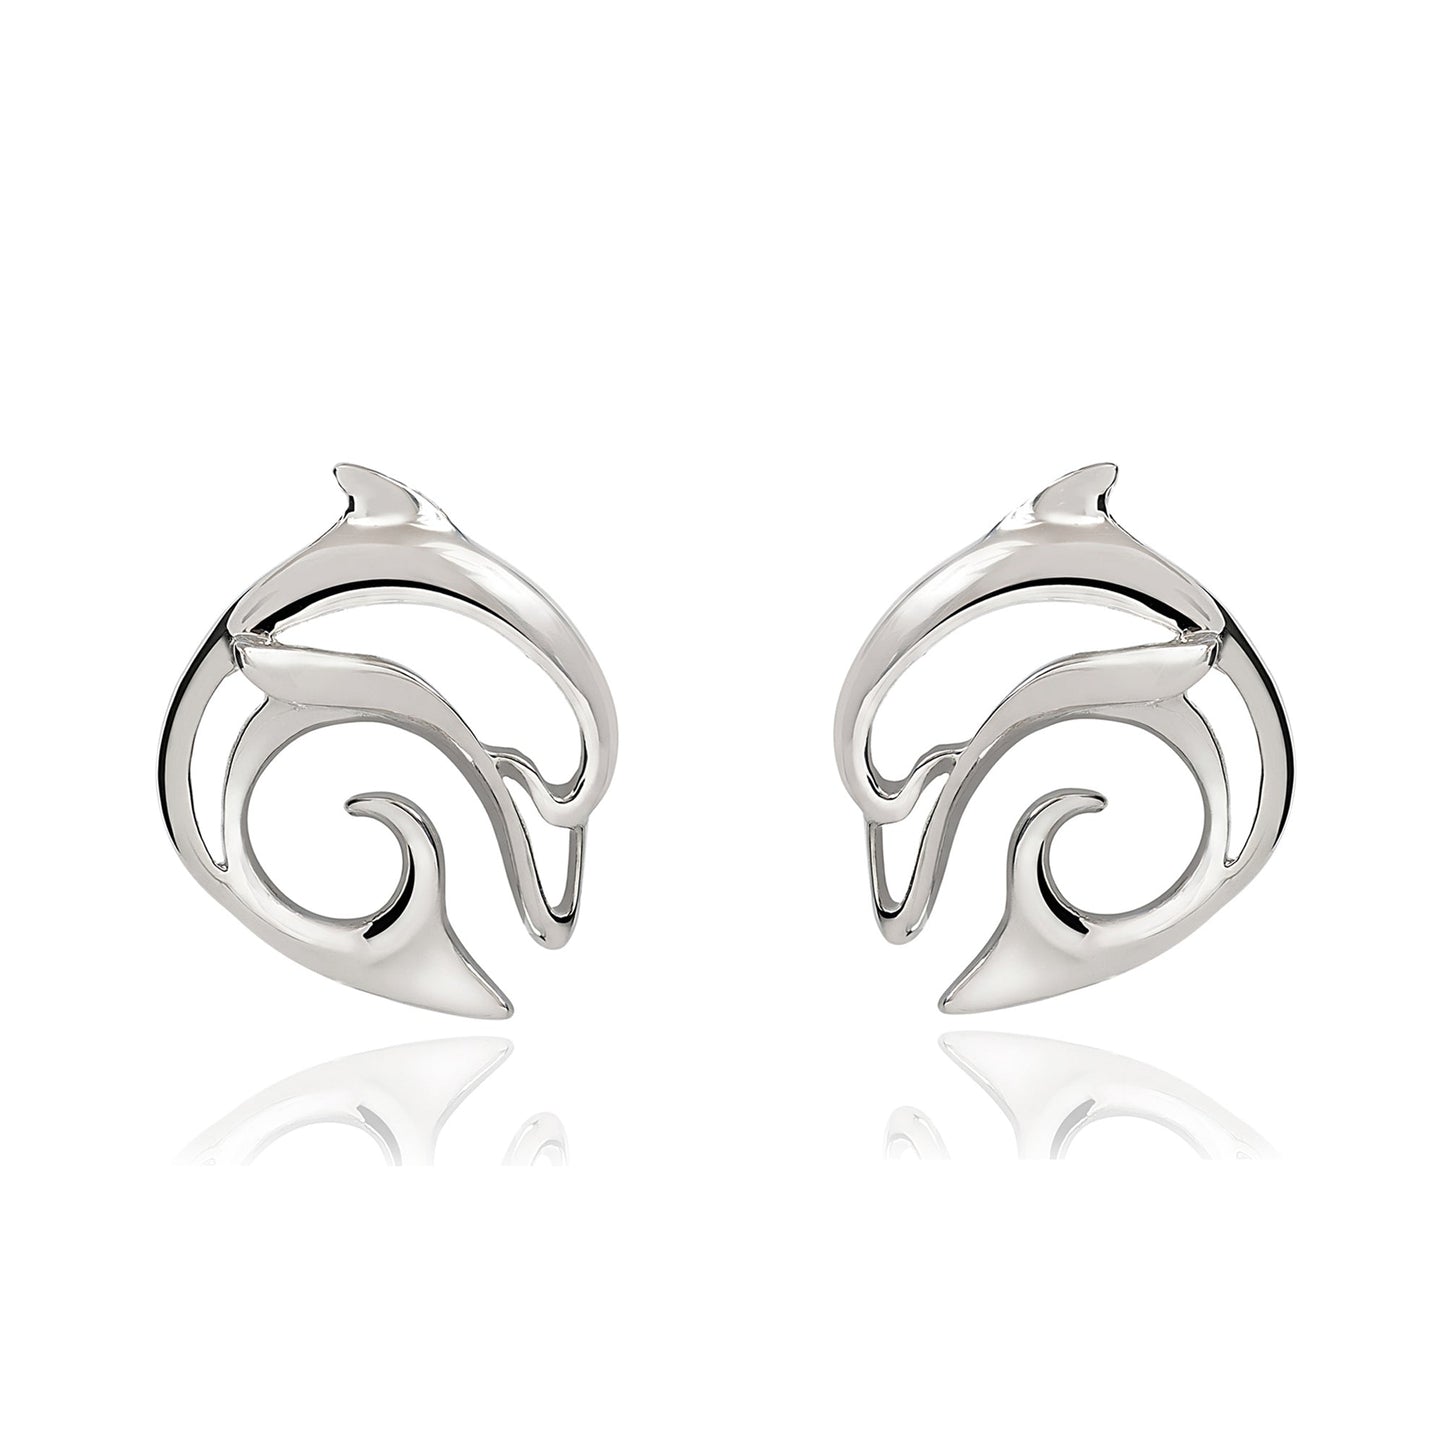 Dolphin Post Earrings Sterling Silver- Dolphin Stud Earrings for Women, Dolphin Charm Earrings, Dolphin Stud Earrings Sterling Silver - The Tool Store